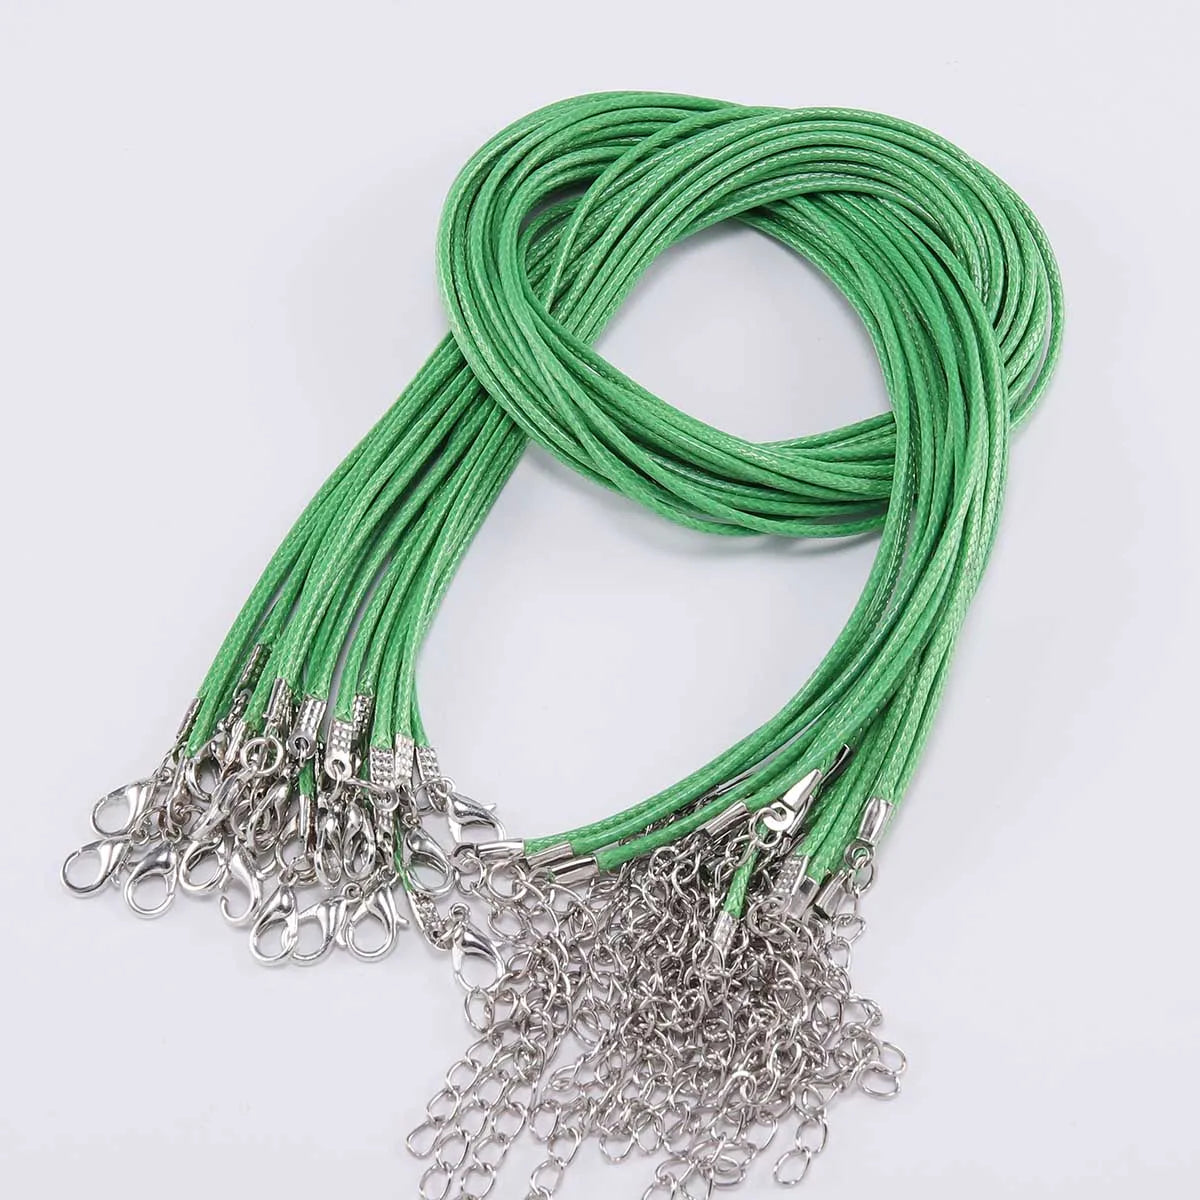 10Pcs/lot Dia 1.5/2mm Leather Cord Necklace With Clasp Adjustable Braided Rope for Jewelry Making DIY Necklace Bracelet Supplies